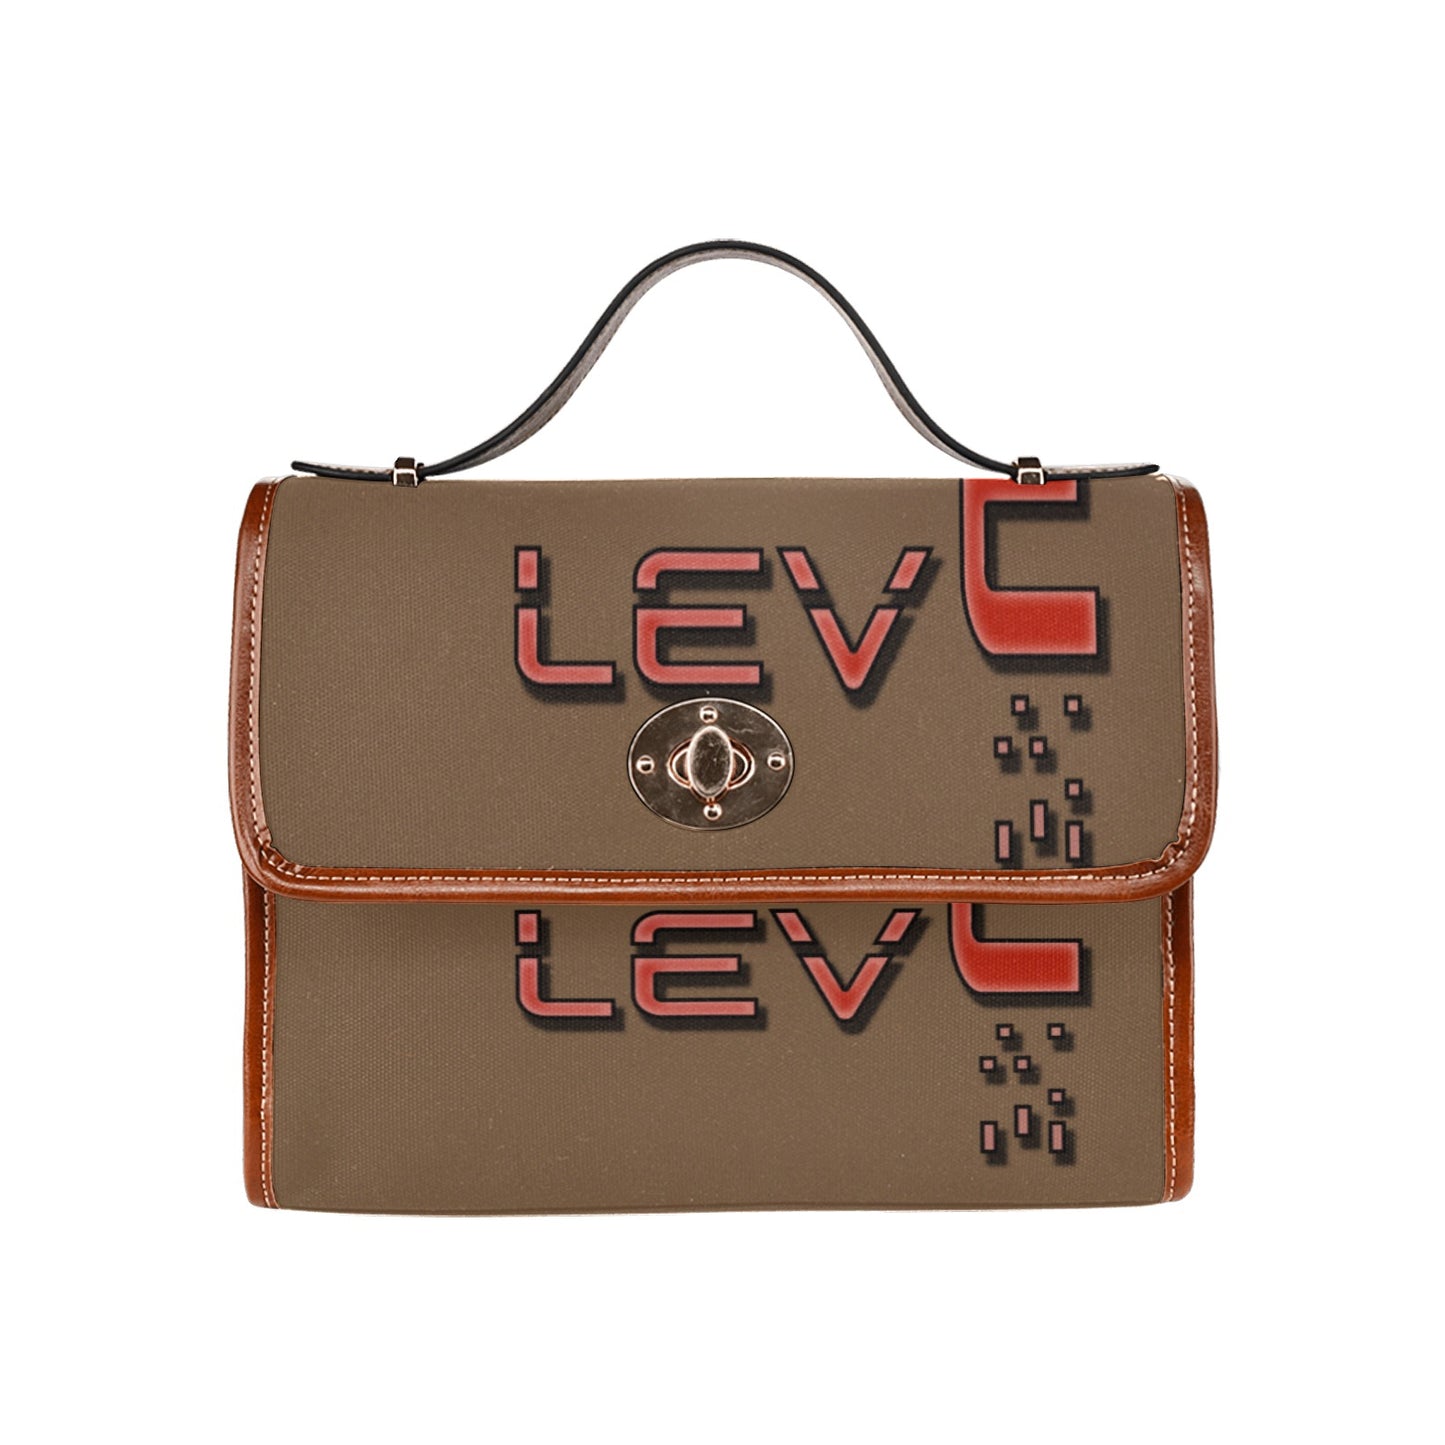 fz red levels handbag one size / fz - levels bag-brown all over print waterproof canvas bag(model1641)(brown strap)